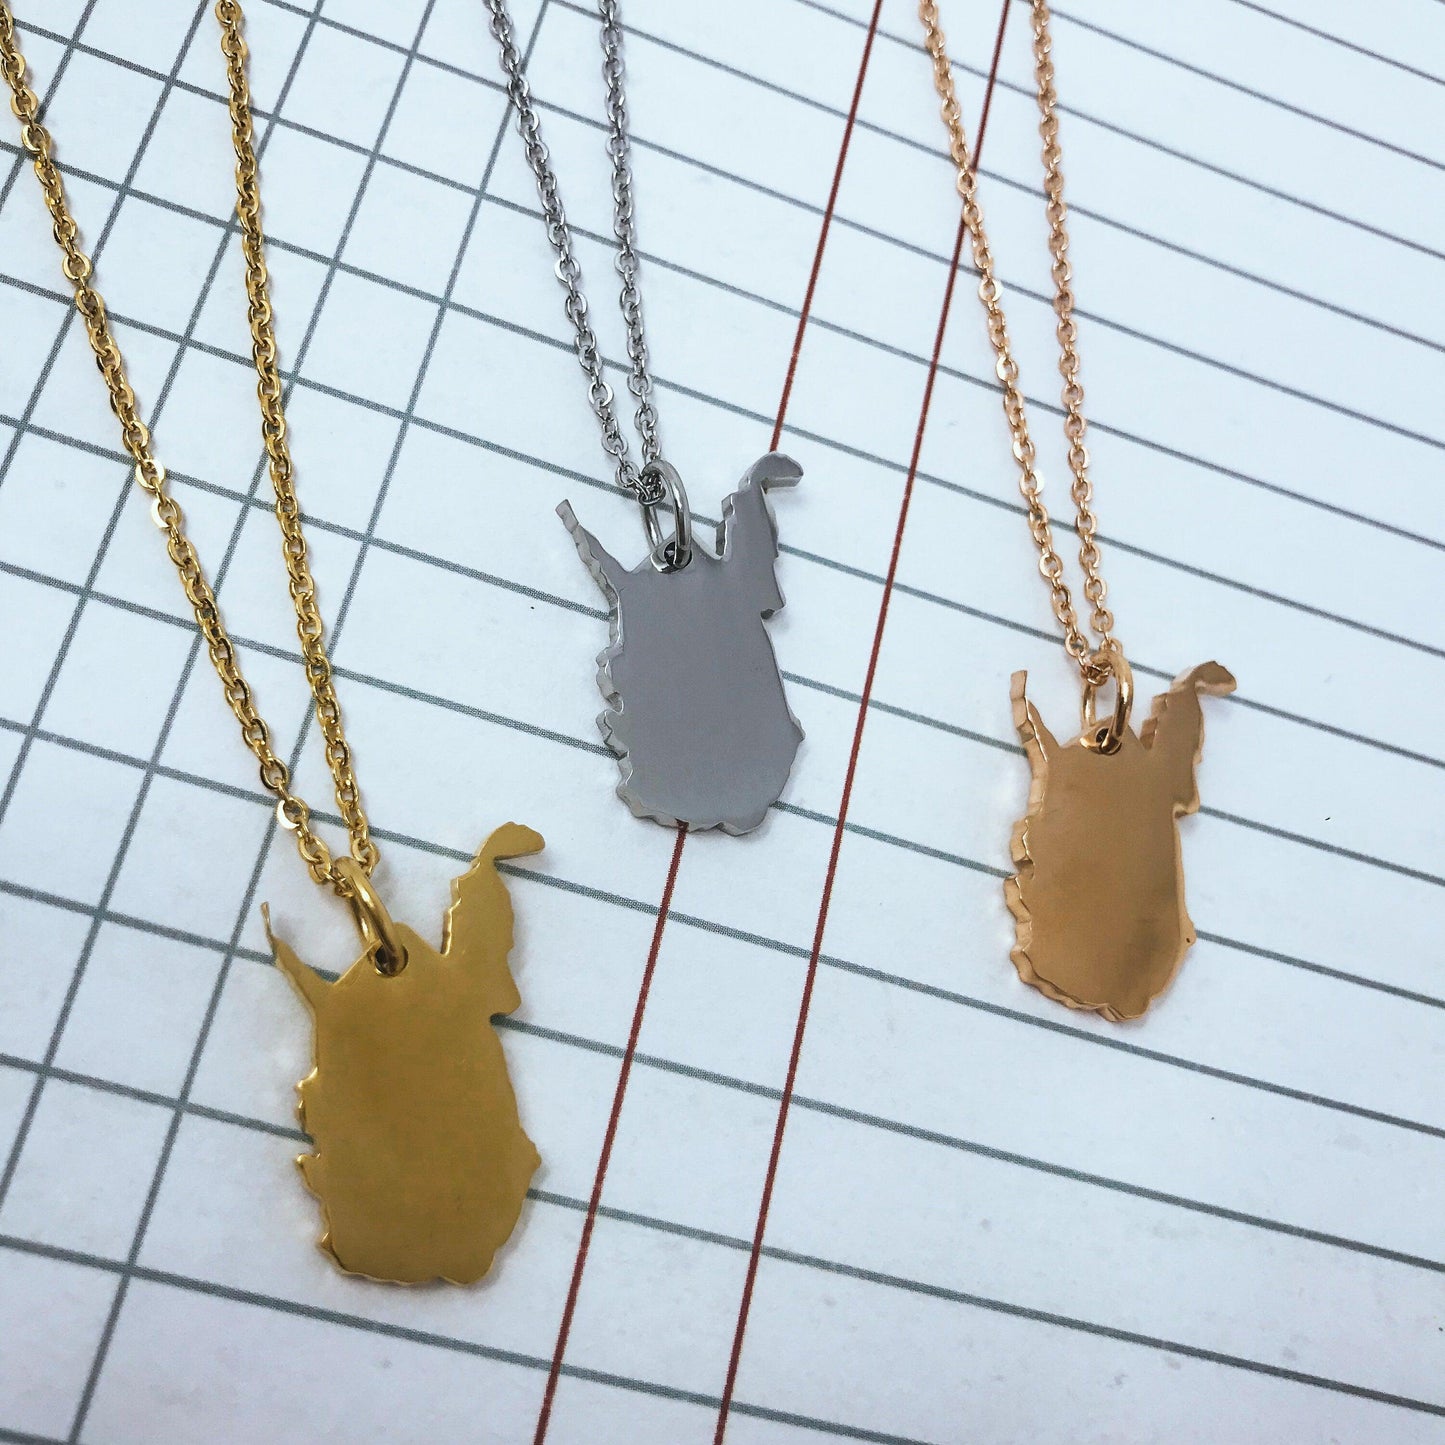 West Virginia State Silhouette Necklaces in 3 different colors: Gold, Silver & Rose Gold